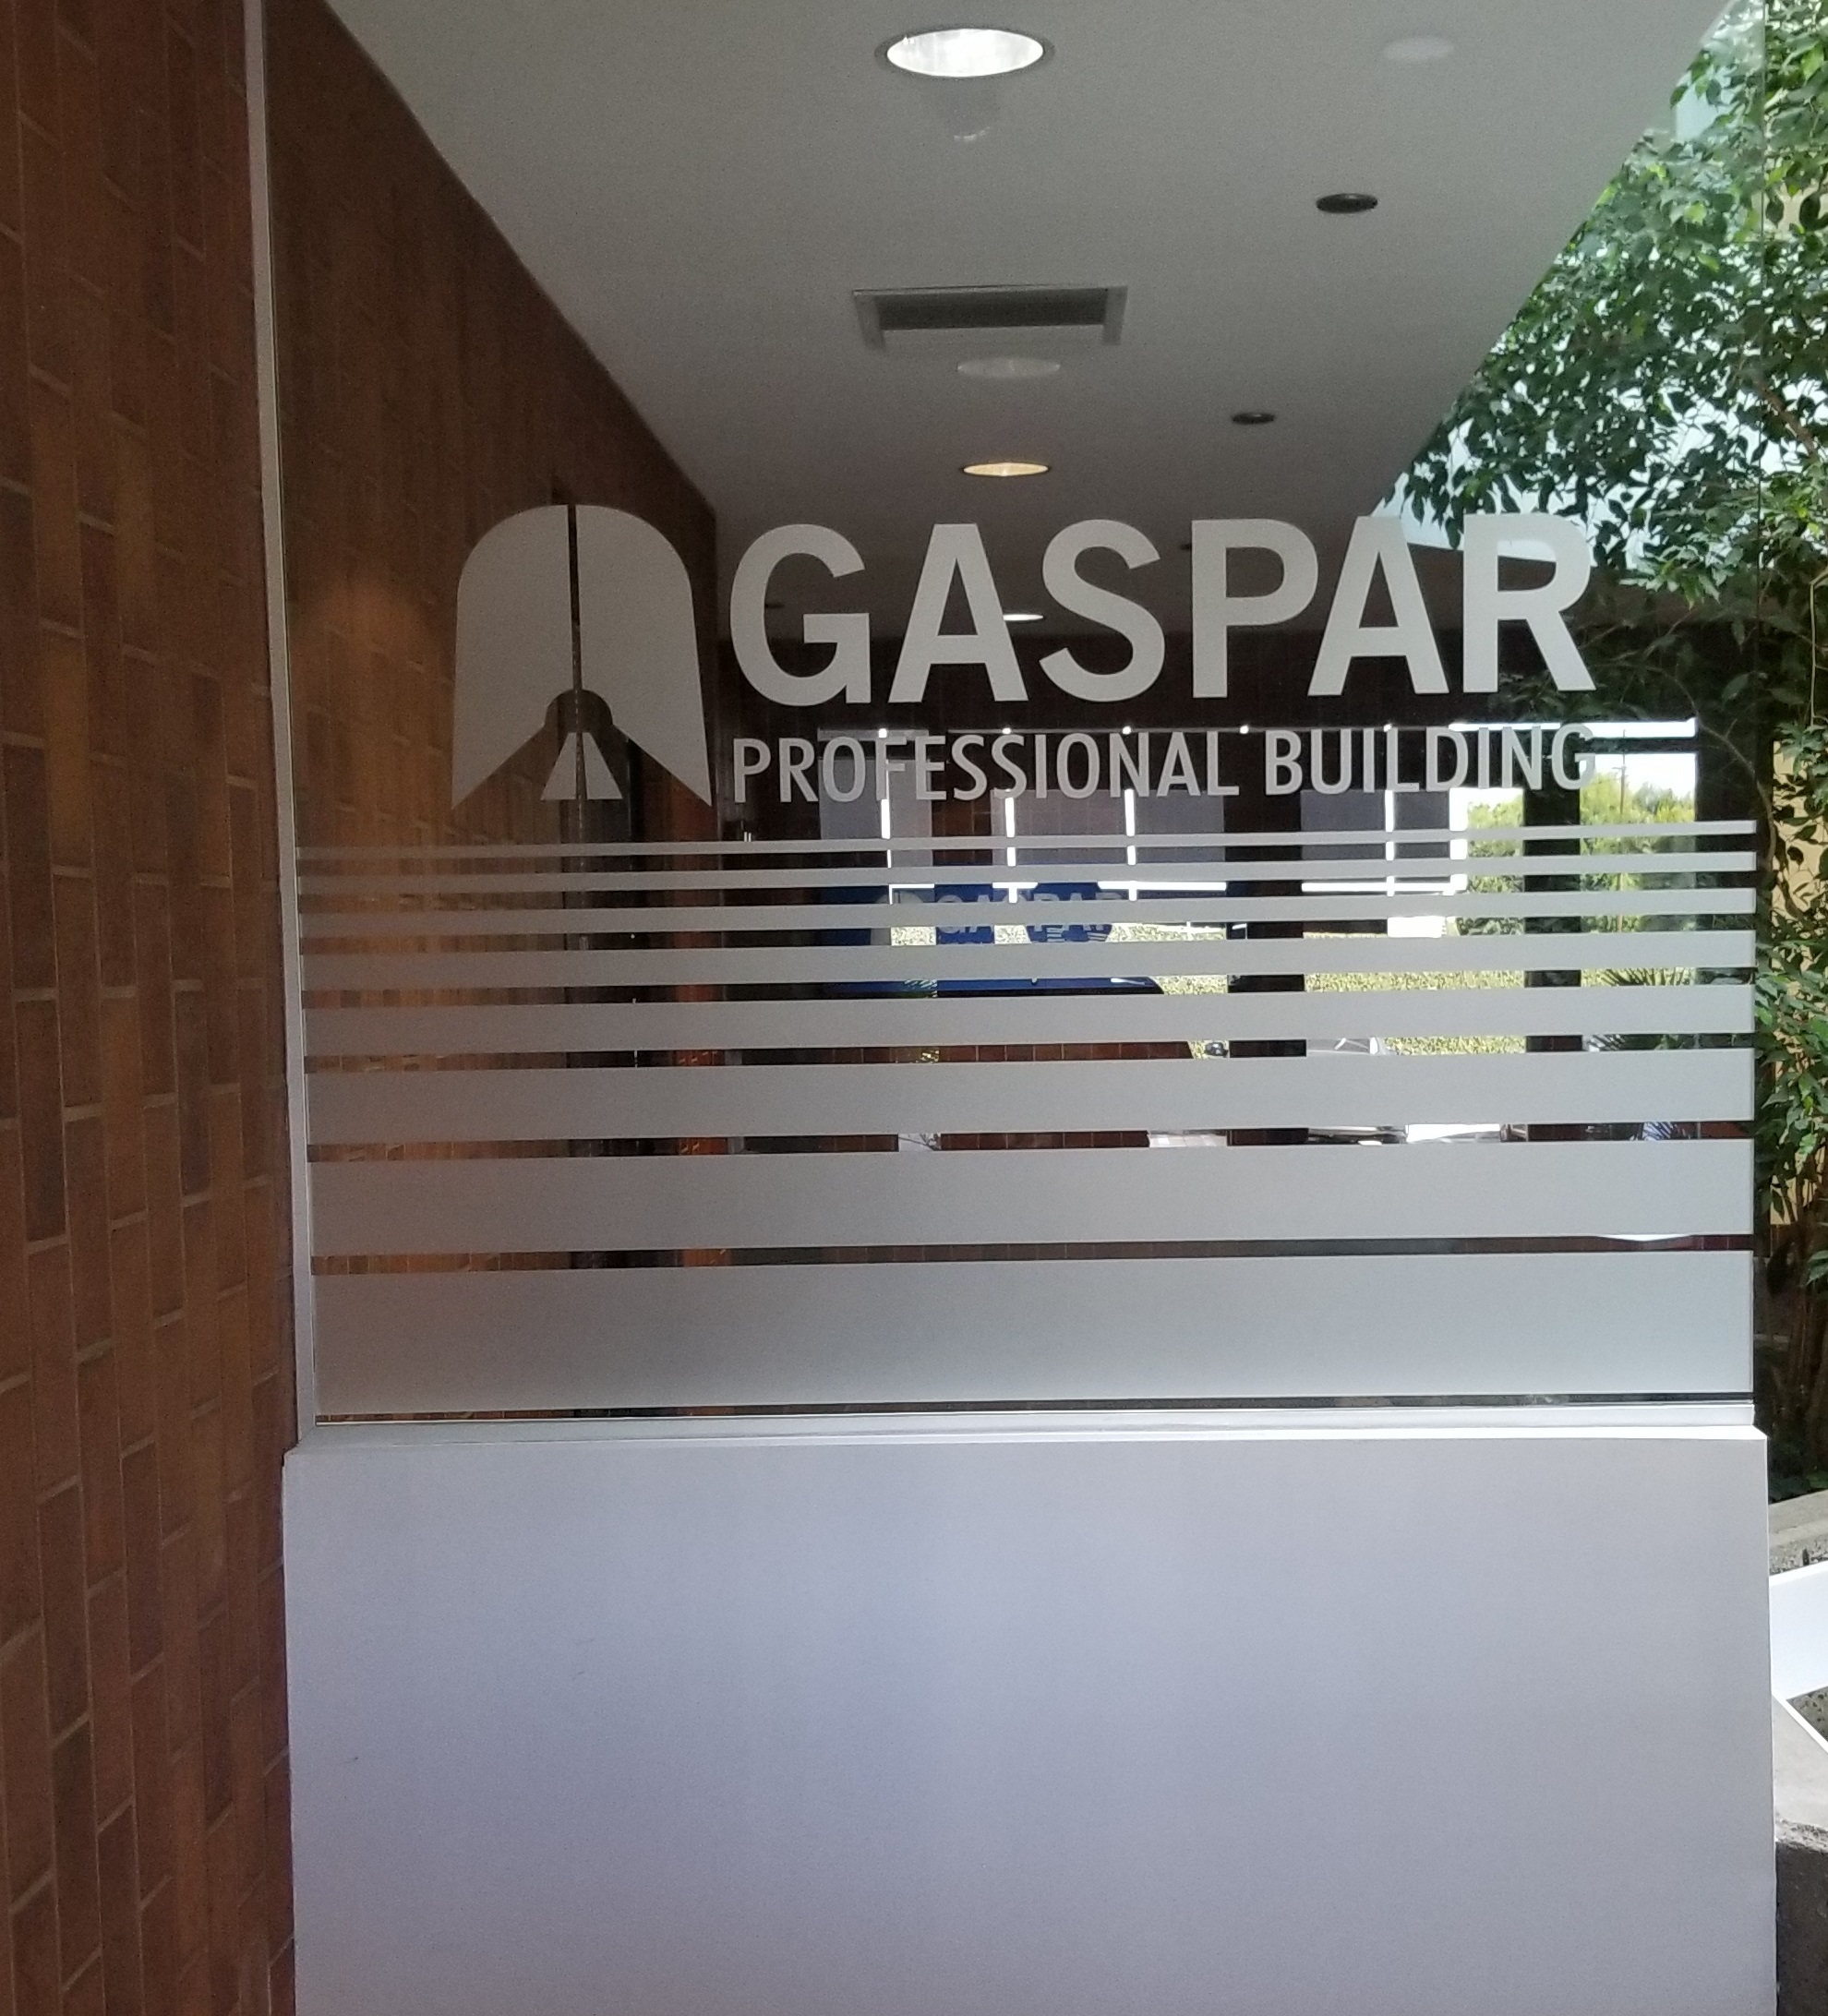 Make your lobby desk presentable with signage. Like this etched vinyl office window graphics for Gaspar Insurance in Woodland Hills.